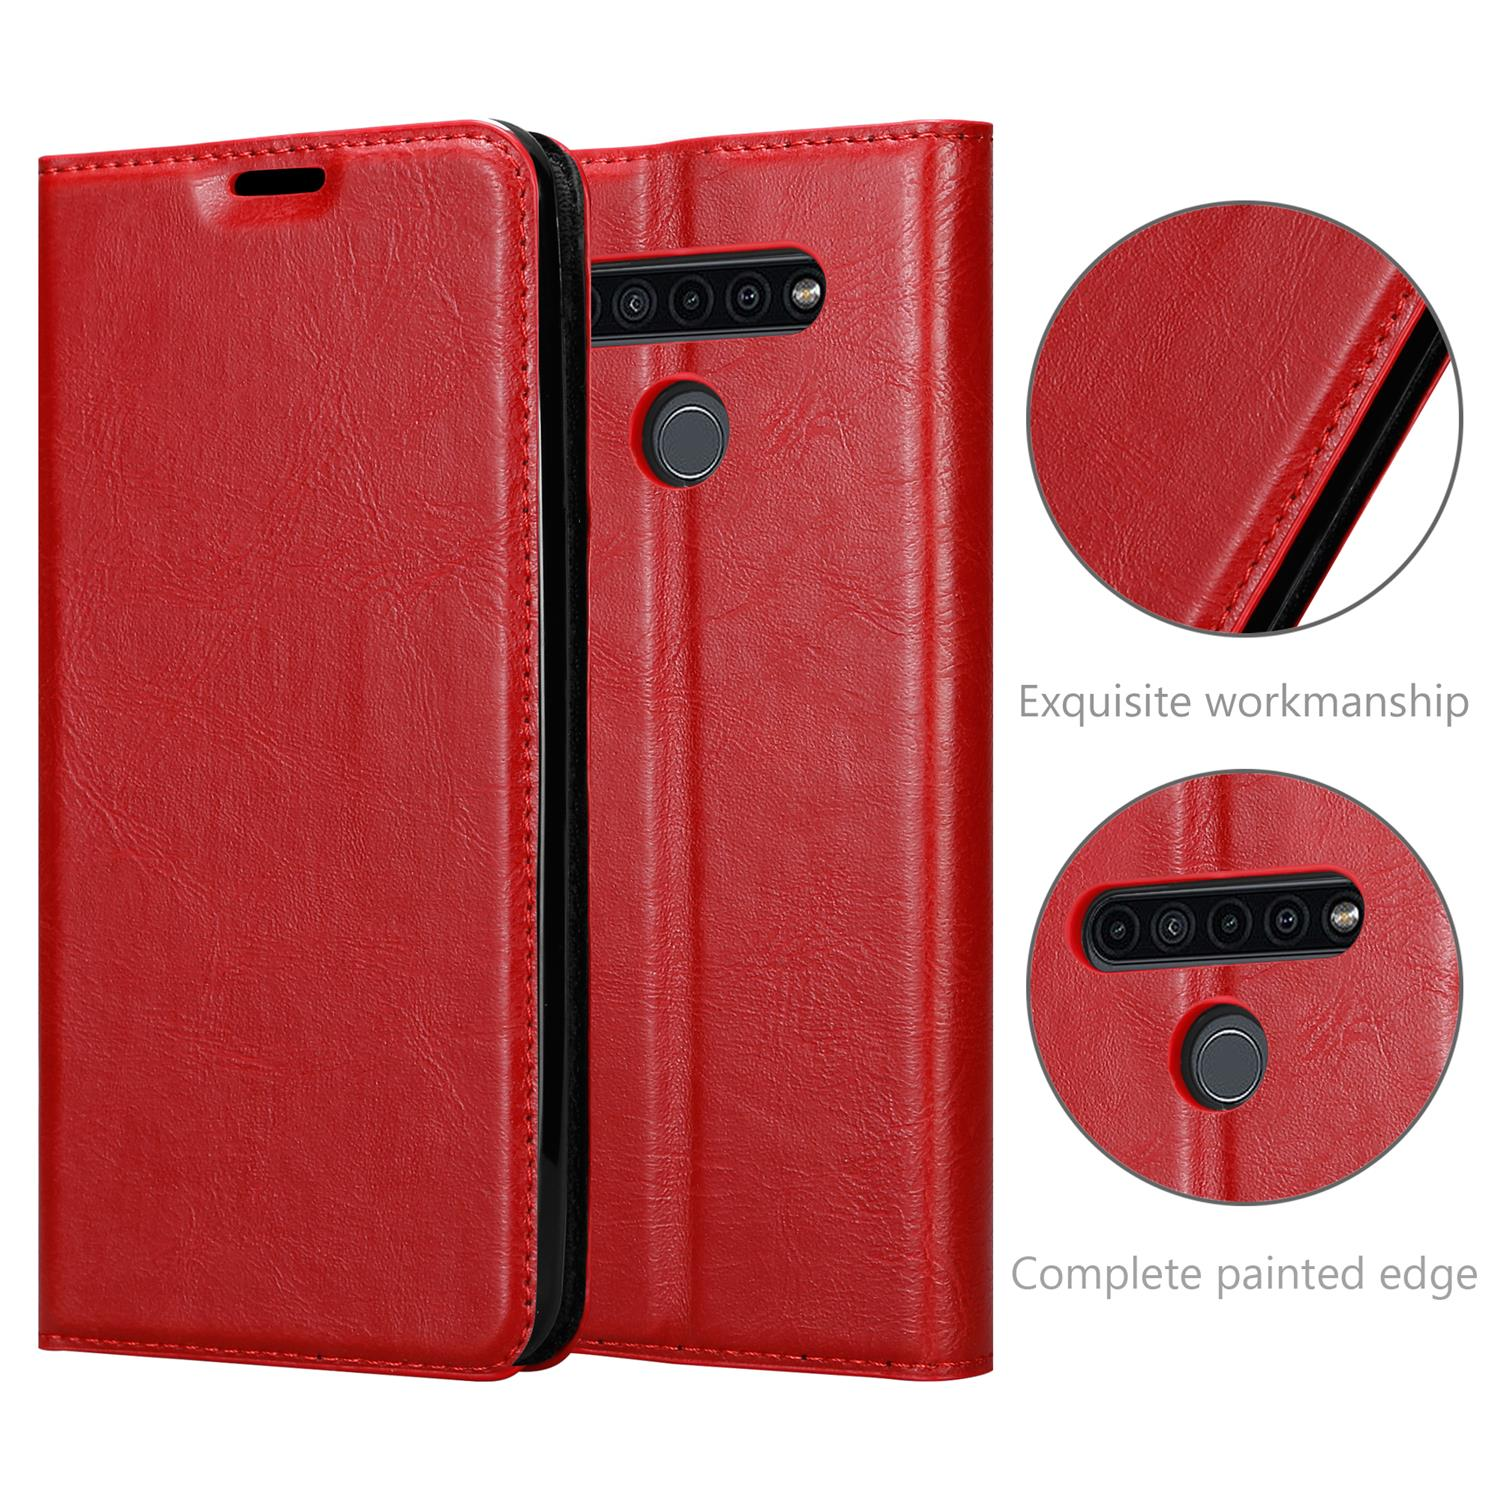 CADORABO Book Hülle Invisible Magnet, APFEL ROT Bookcover, K41S, LG